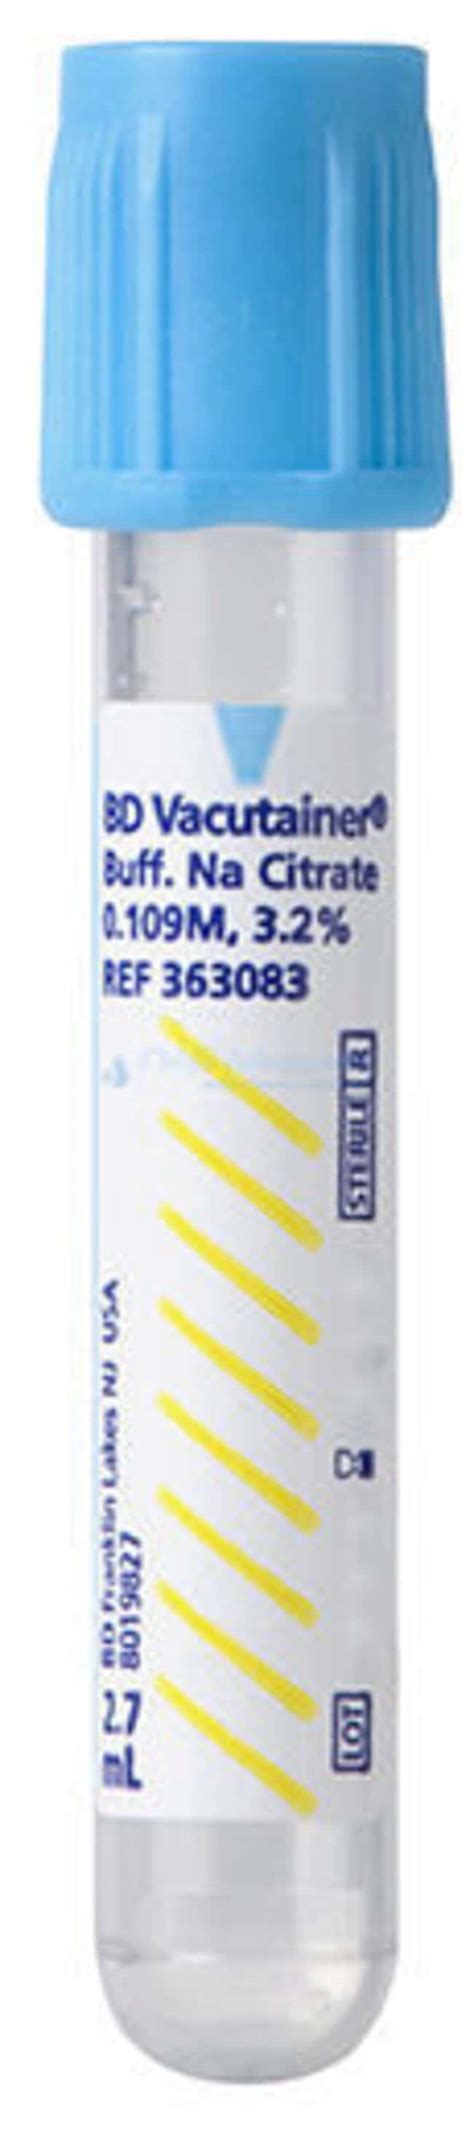 Bd Vacutainer Citrate Tube Patient Care Products First Aid And My Xxx